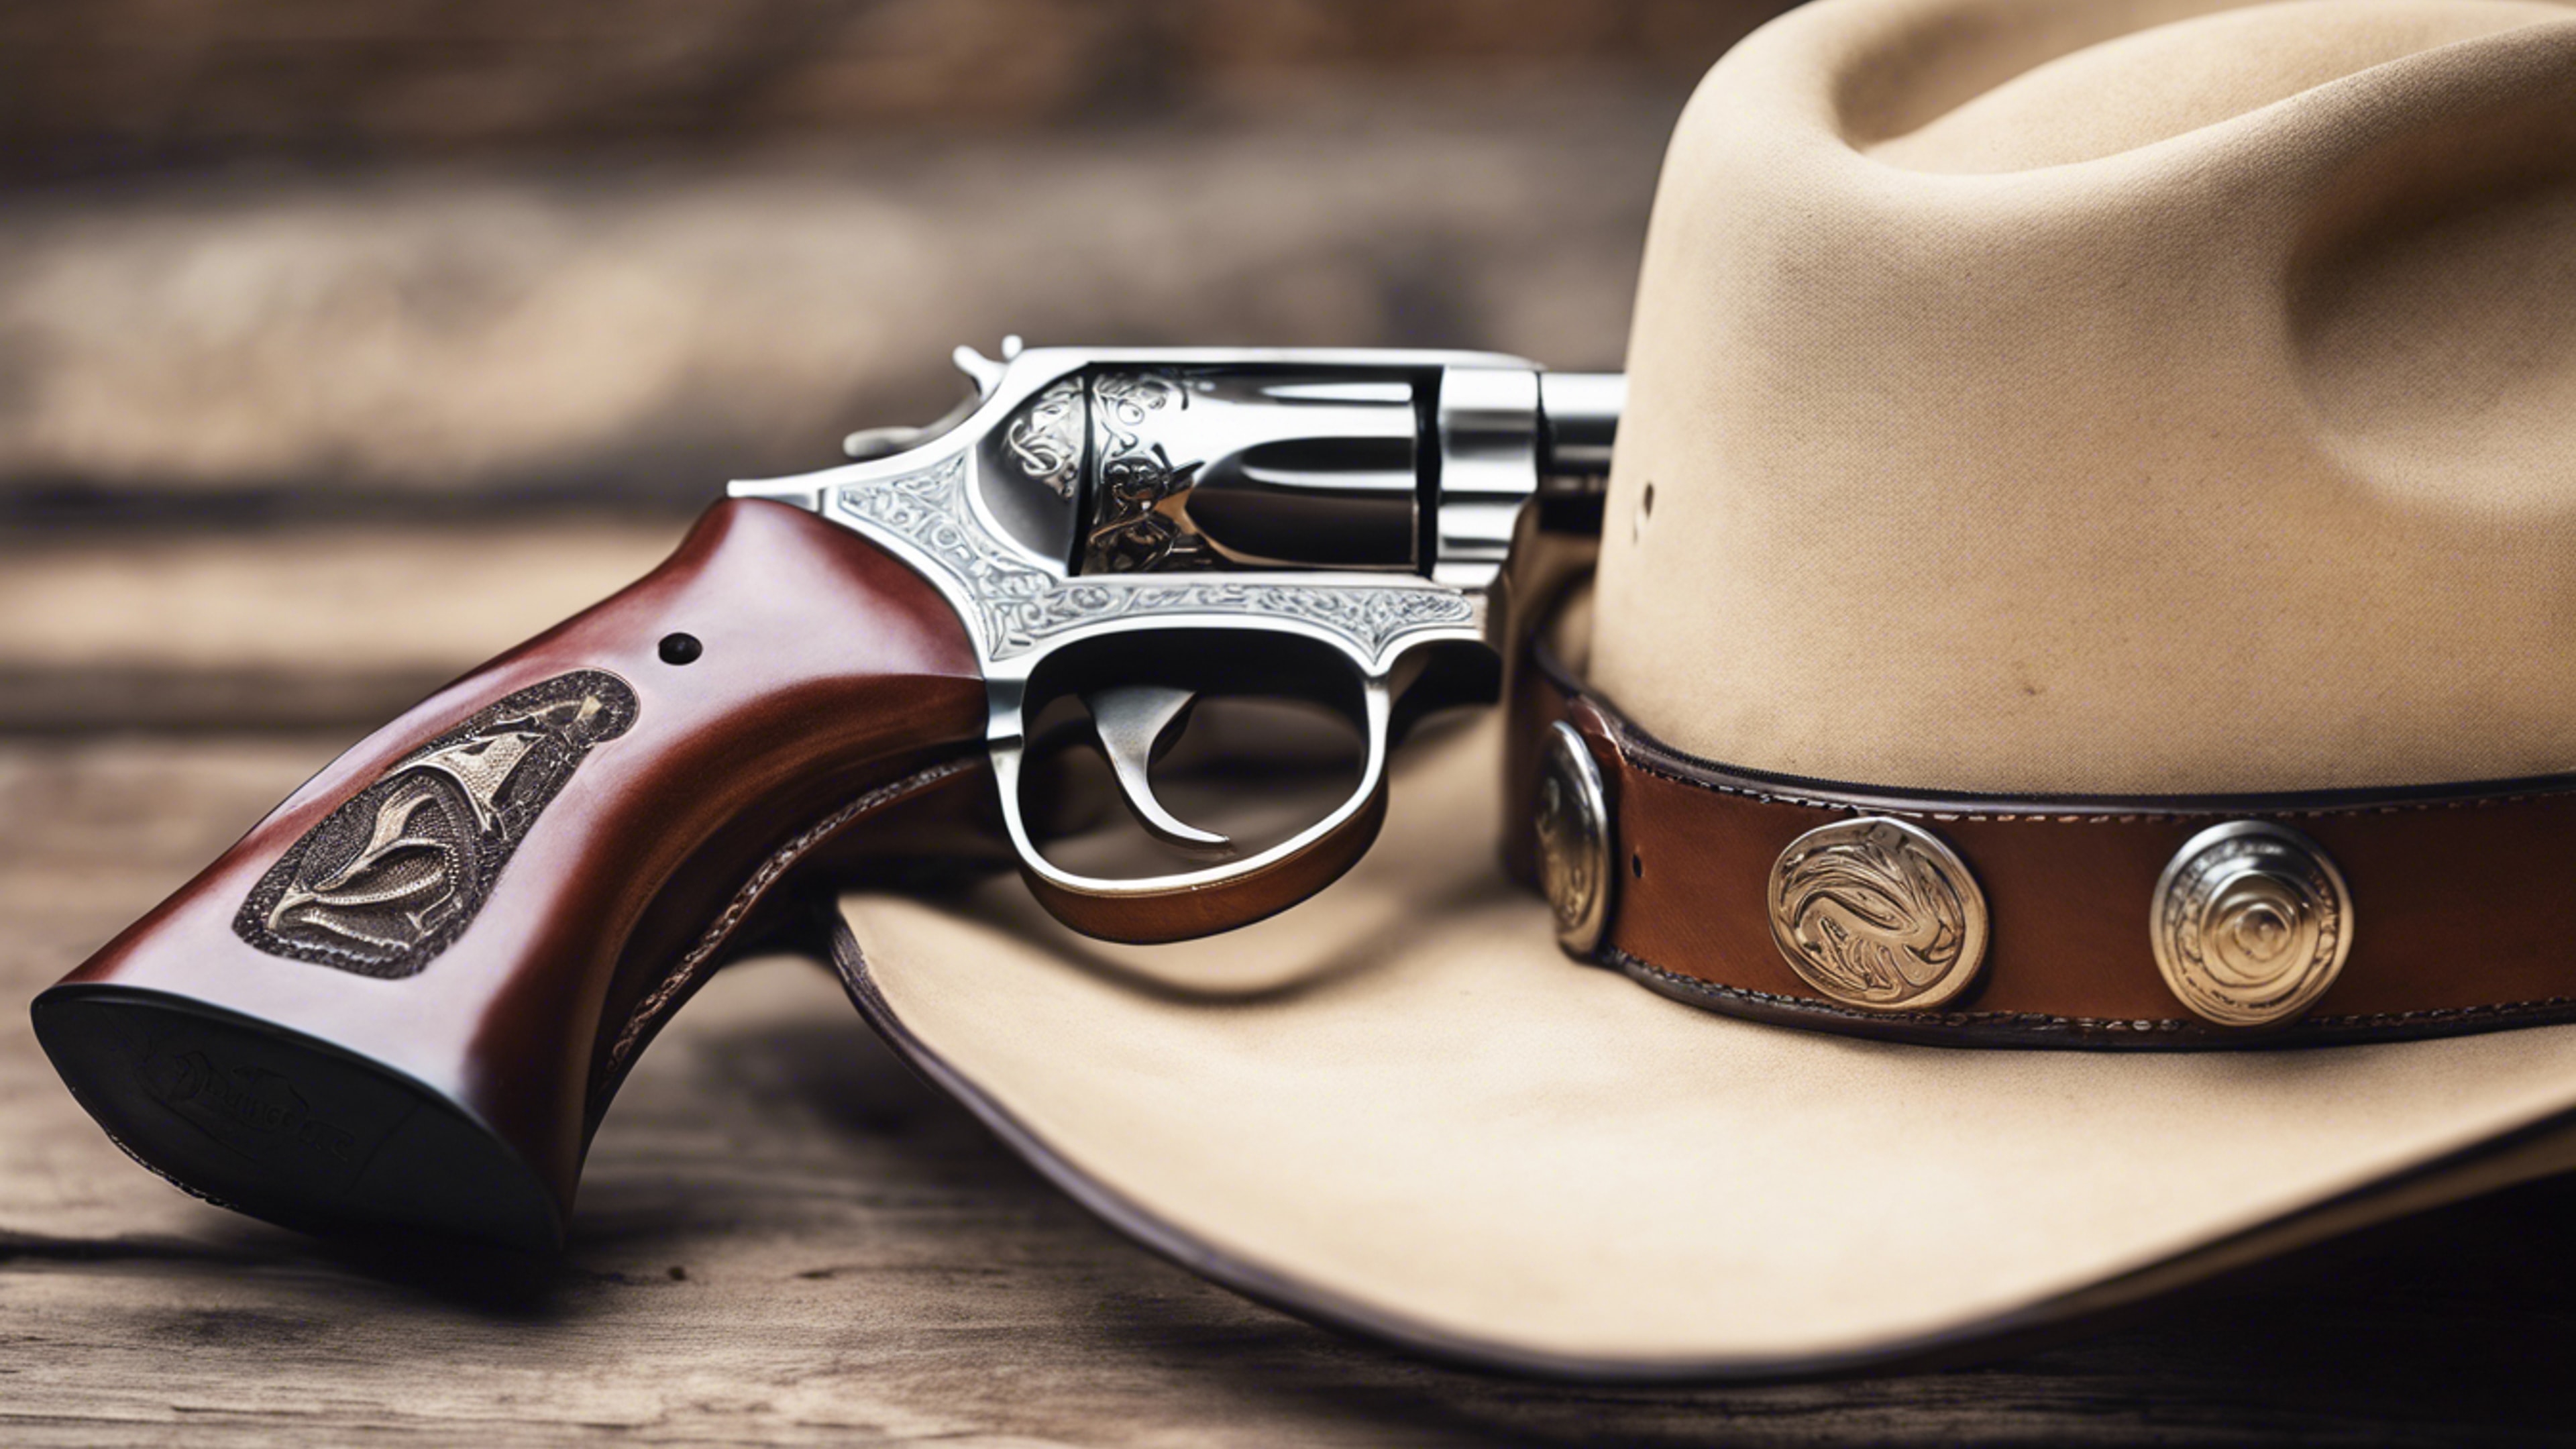 A detailed close-up of a cowboy hat, spurs, and a leather holster with a revolver. 墙纸[6dbcb72083d24ad78673]